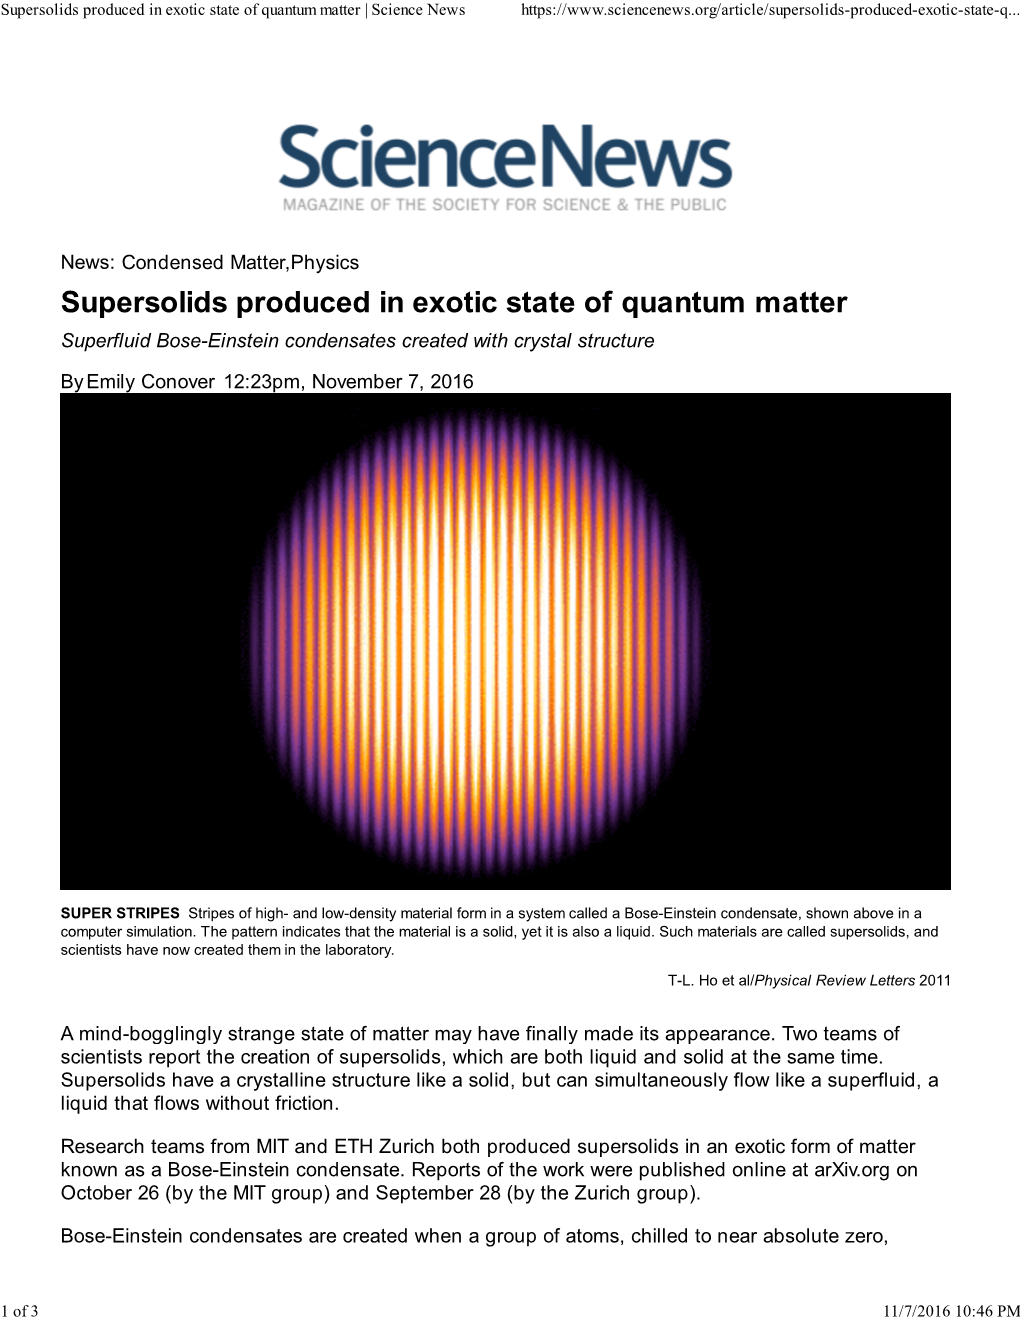 Supersolids Produced in Exotic State of Quantum Matter | Science News